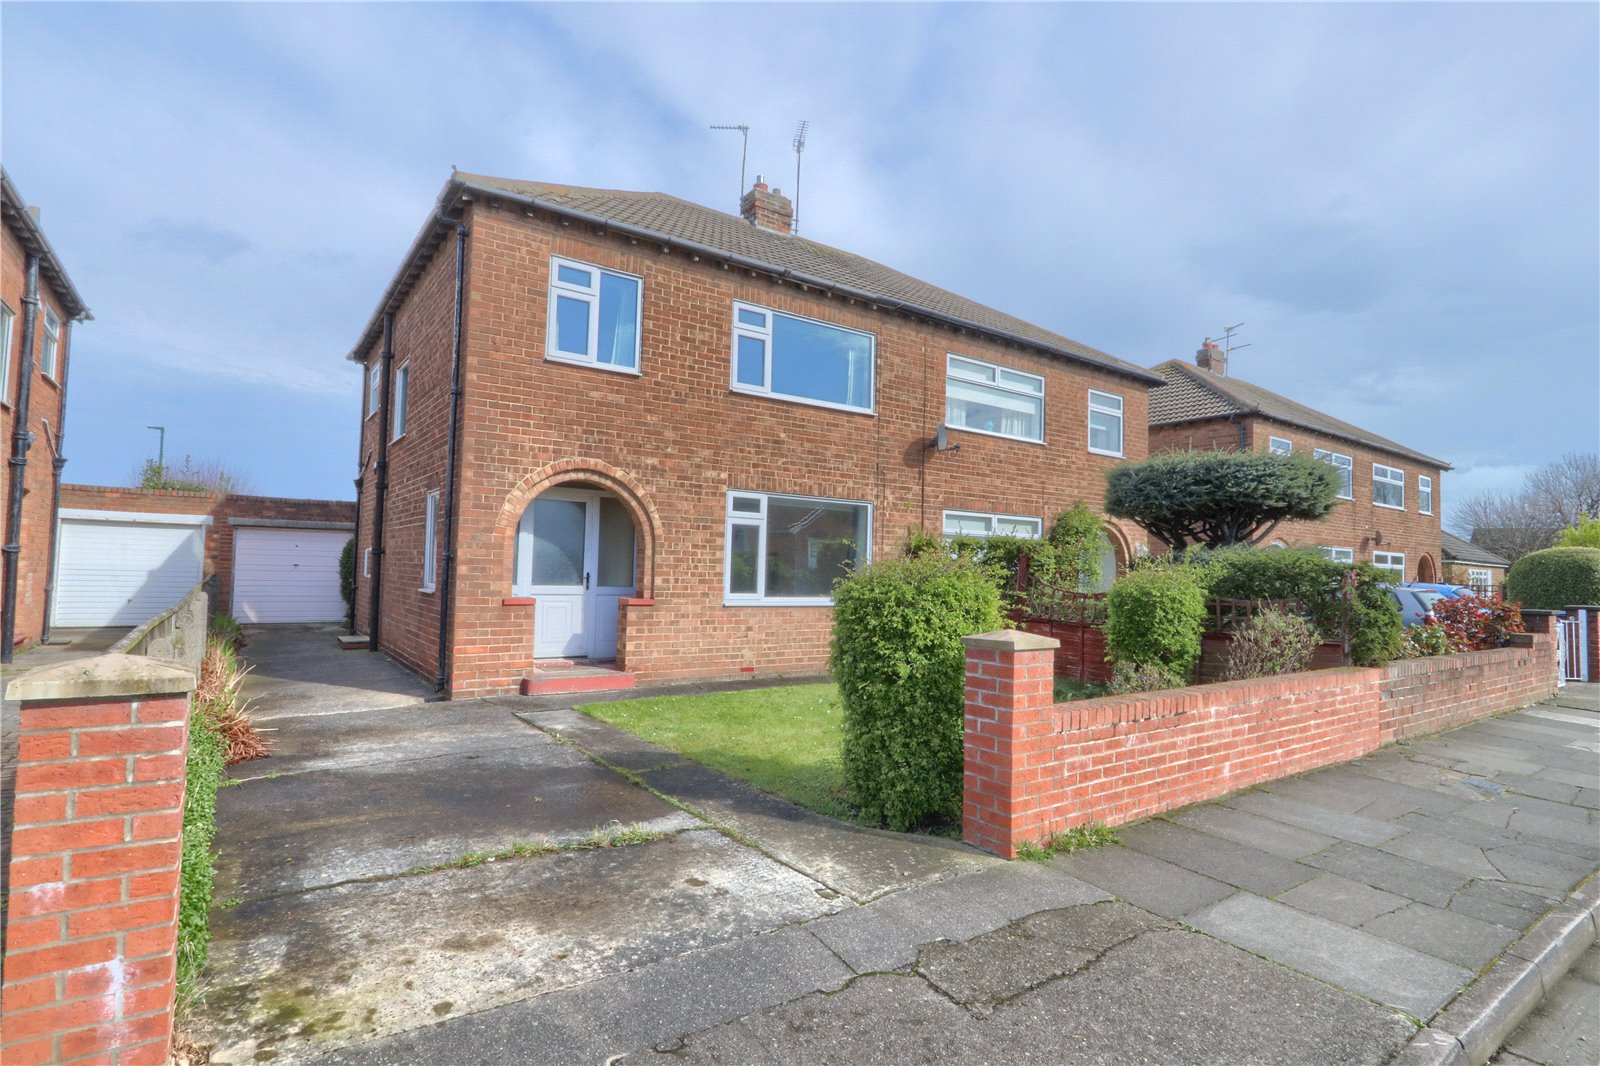 3 bed house for sale in Goodwood Road, Redcar 1